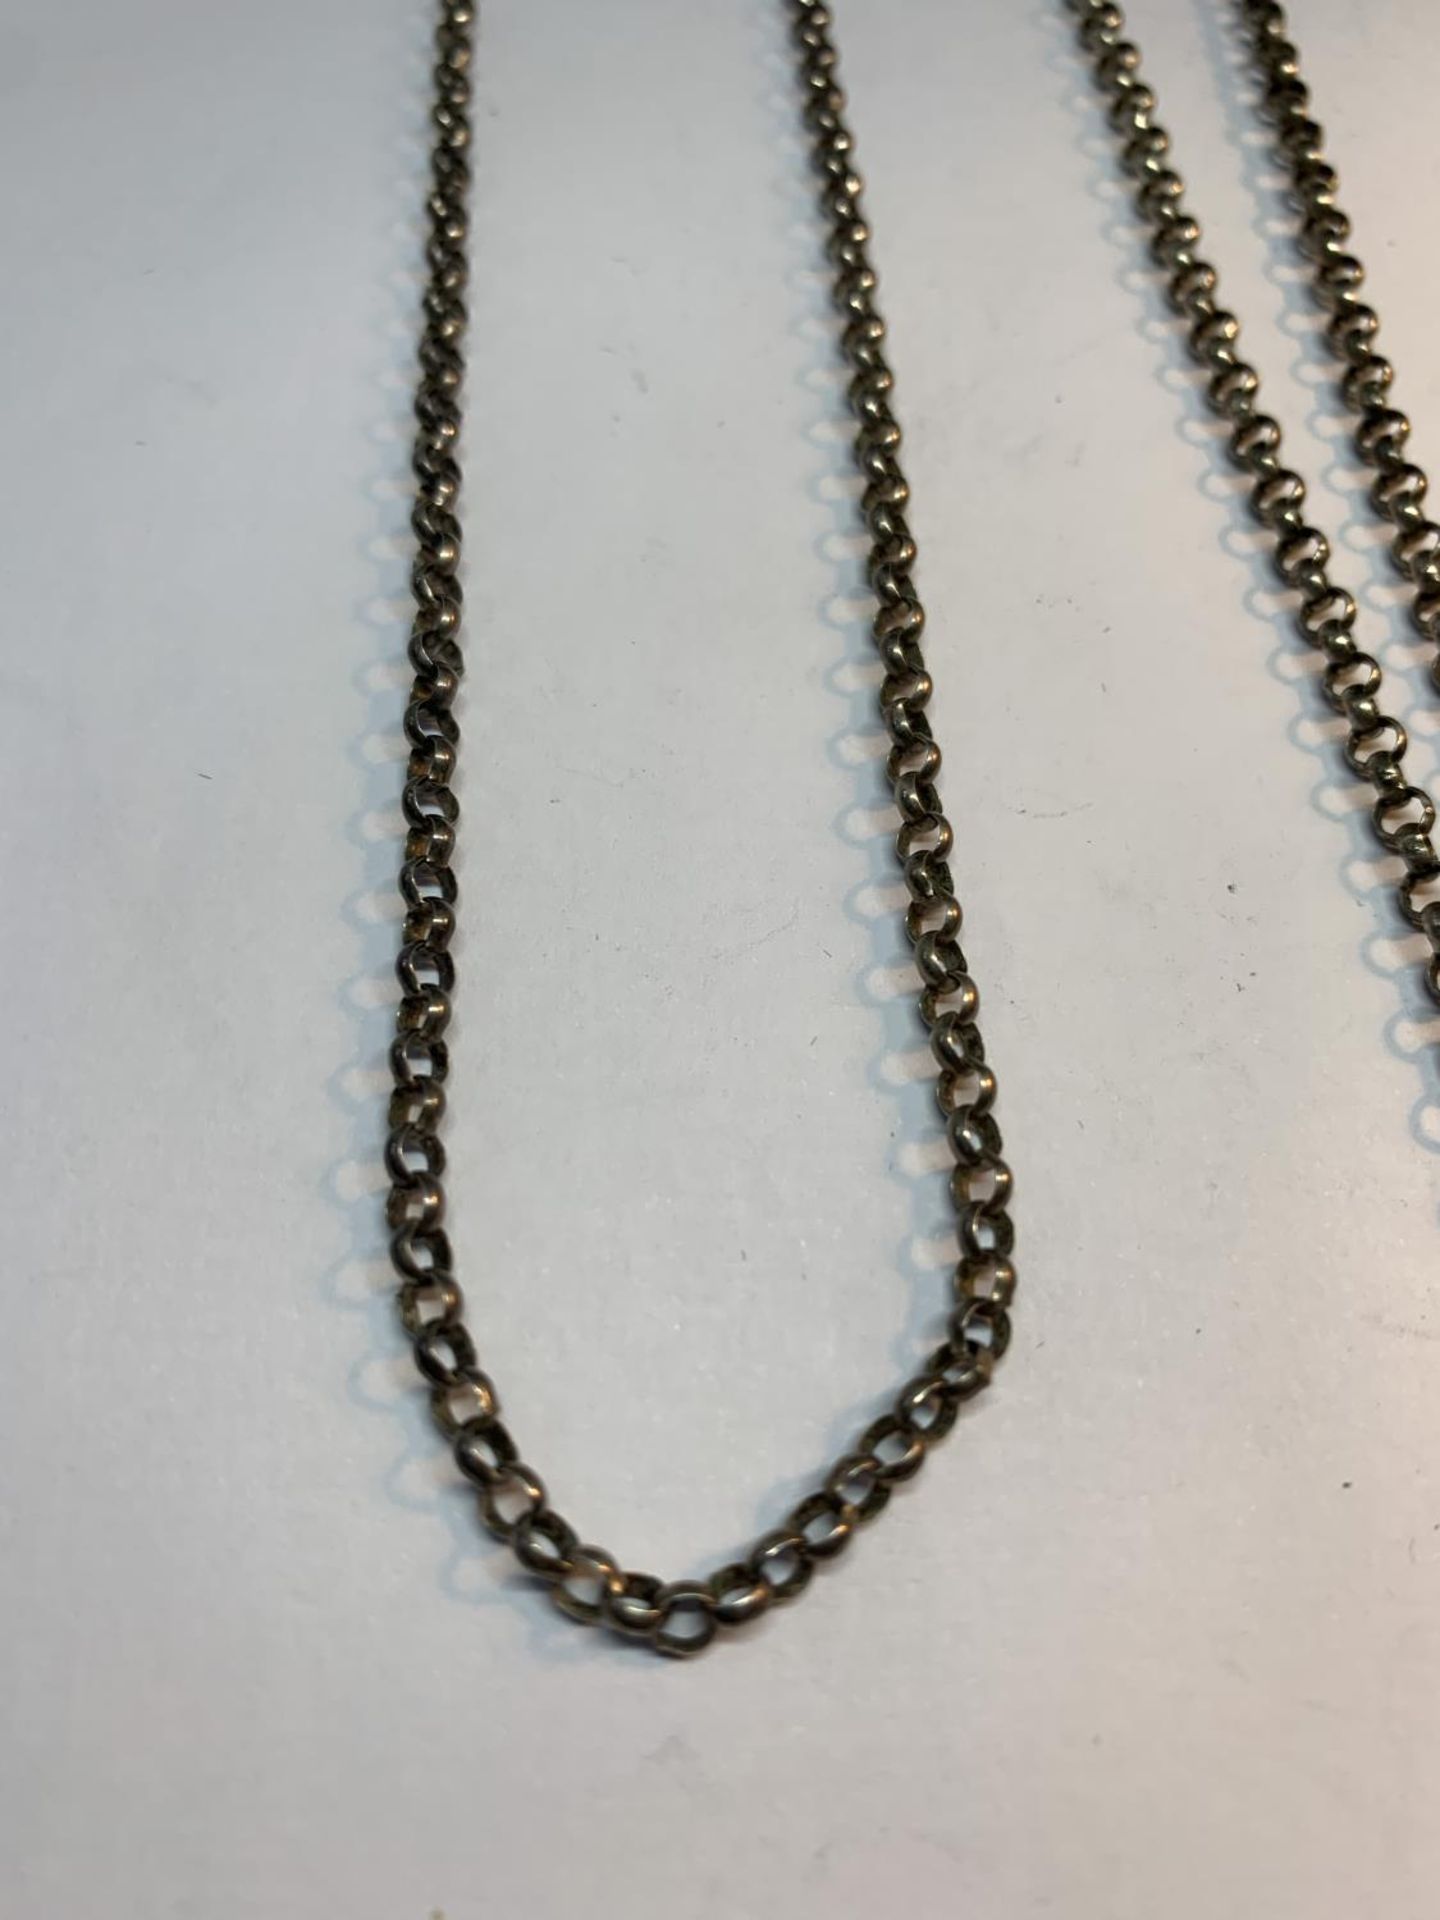 THREE SILVER BELCHER CHAIN NECKLACES - Image 2 of 4